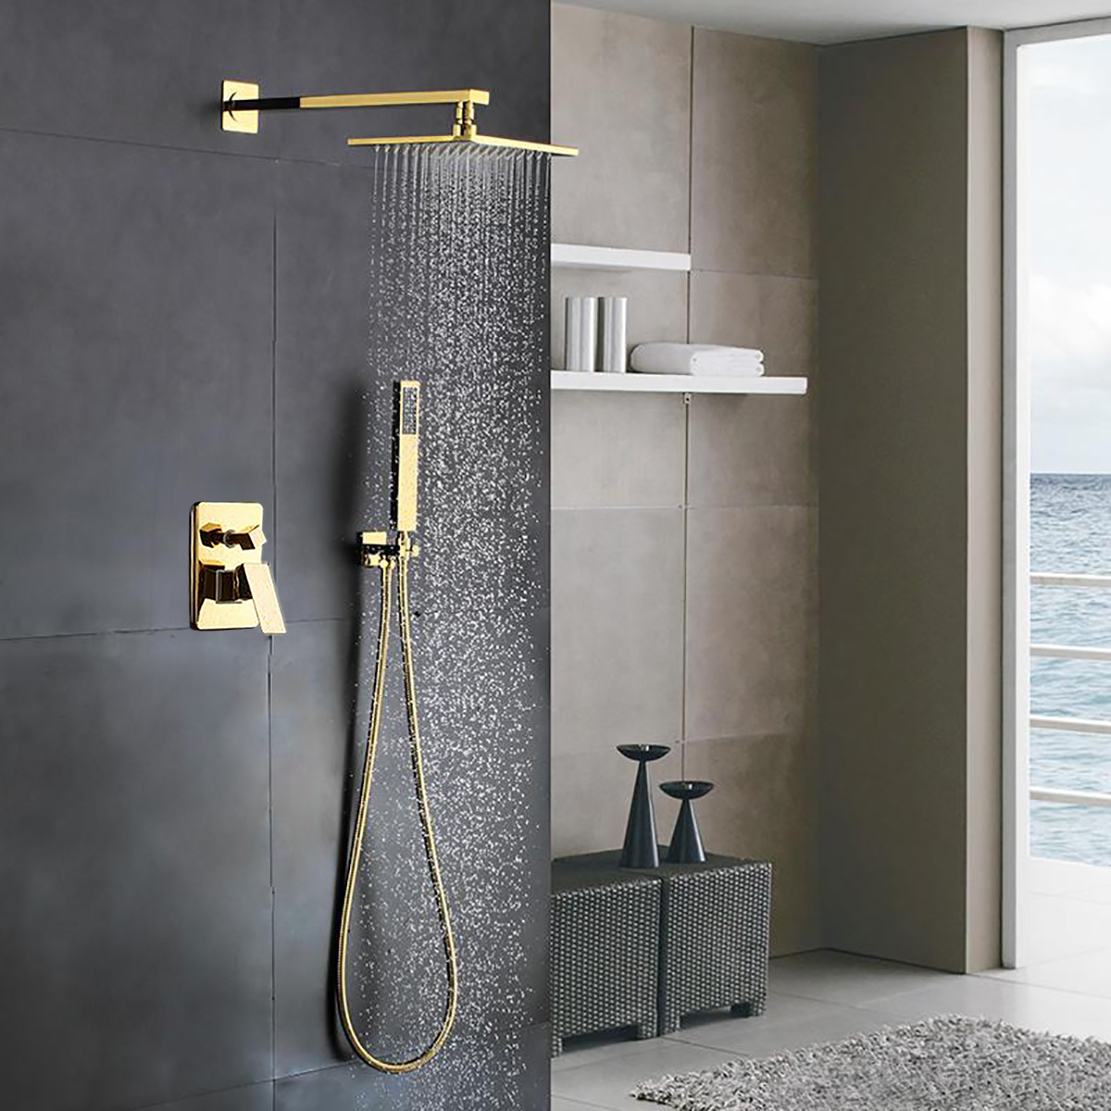 Fontana Balsamo Gold In-Wall Thermostatic Mixer Bathroom Shower System, Wall Mixer With Overhead Shower, Bathroom Wall Mixer Price